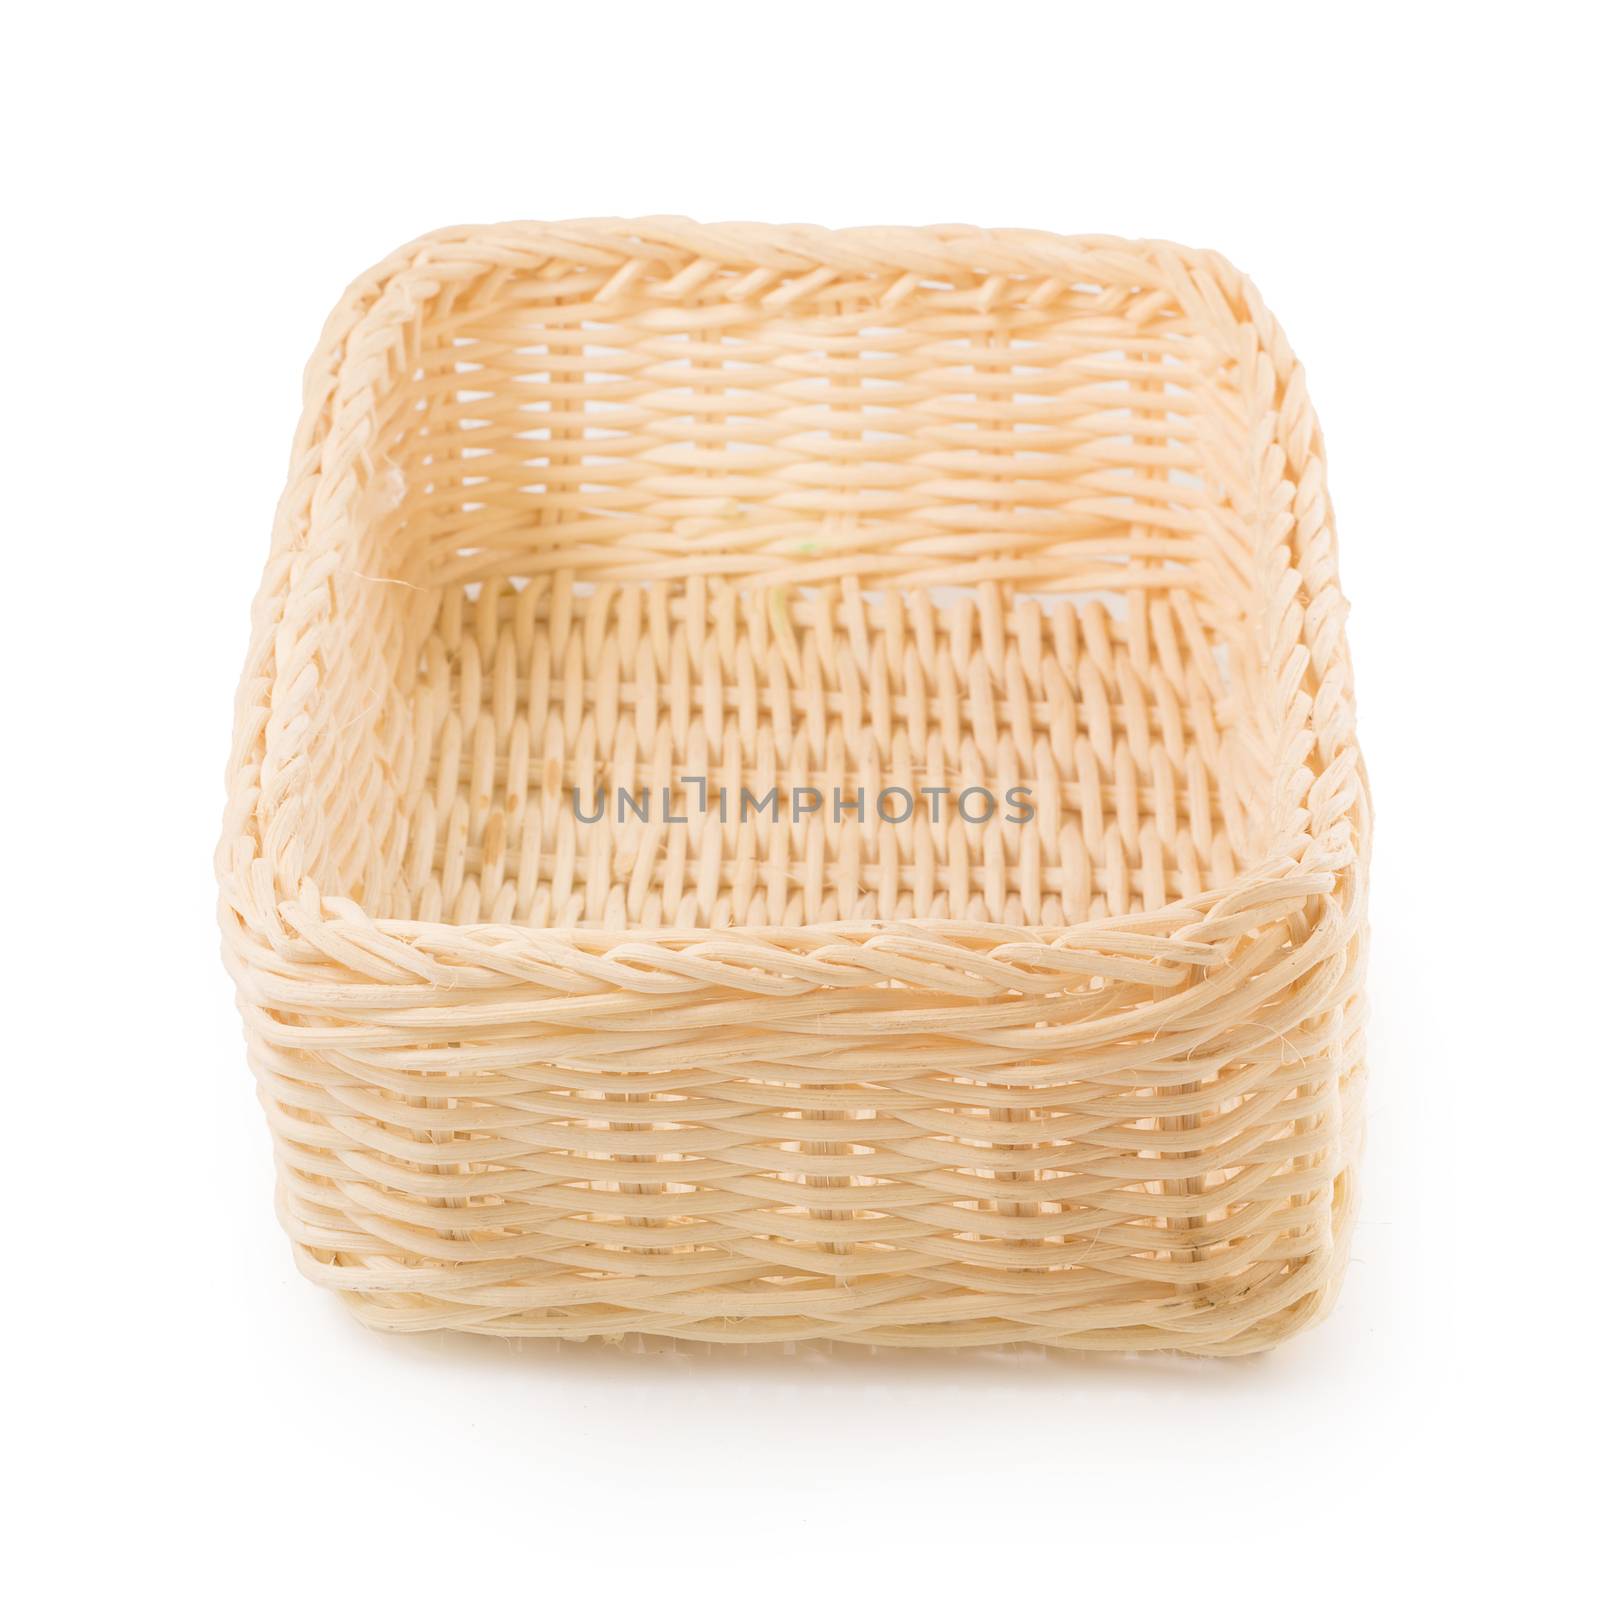 Empty Wicker baskets or bread basket isolated on a white backgro by kaiskynet